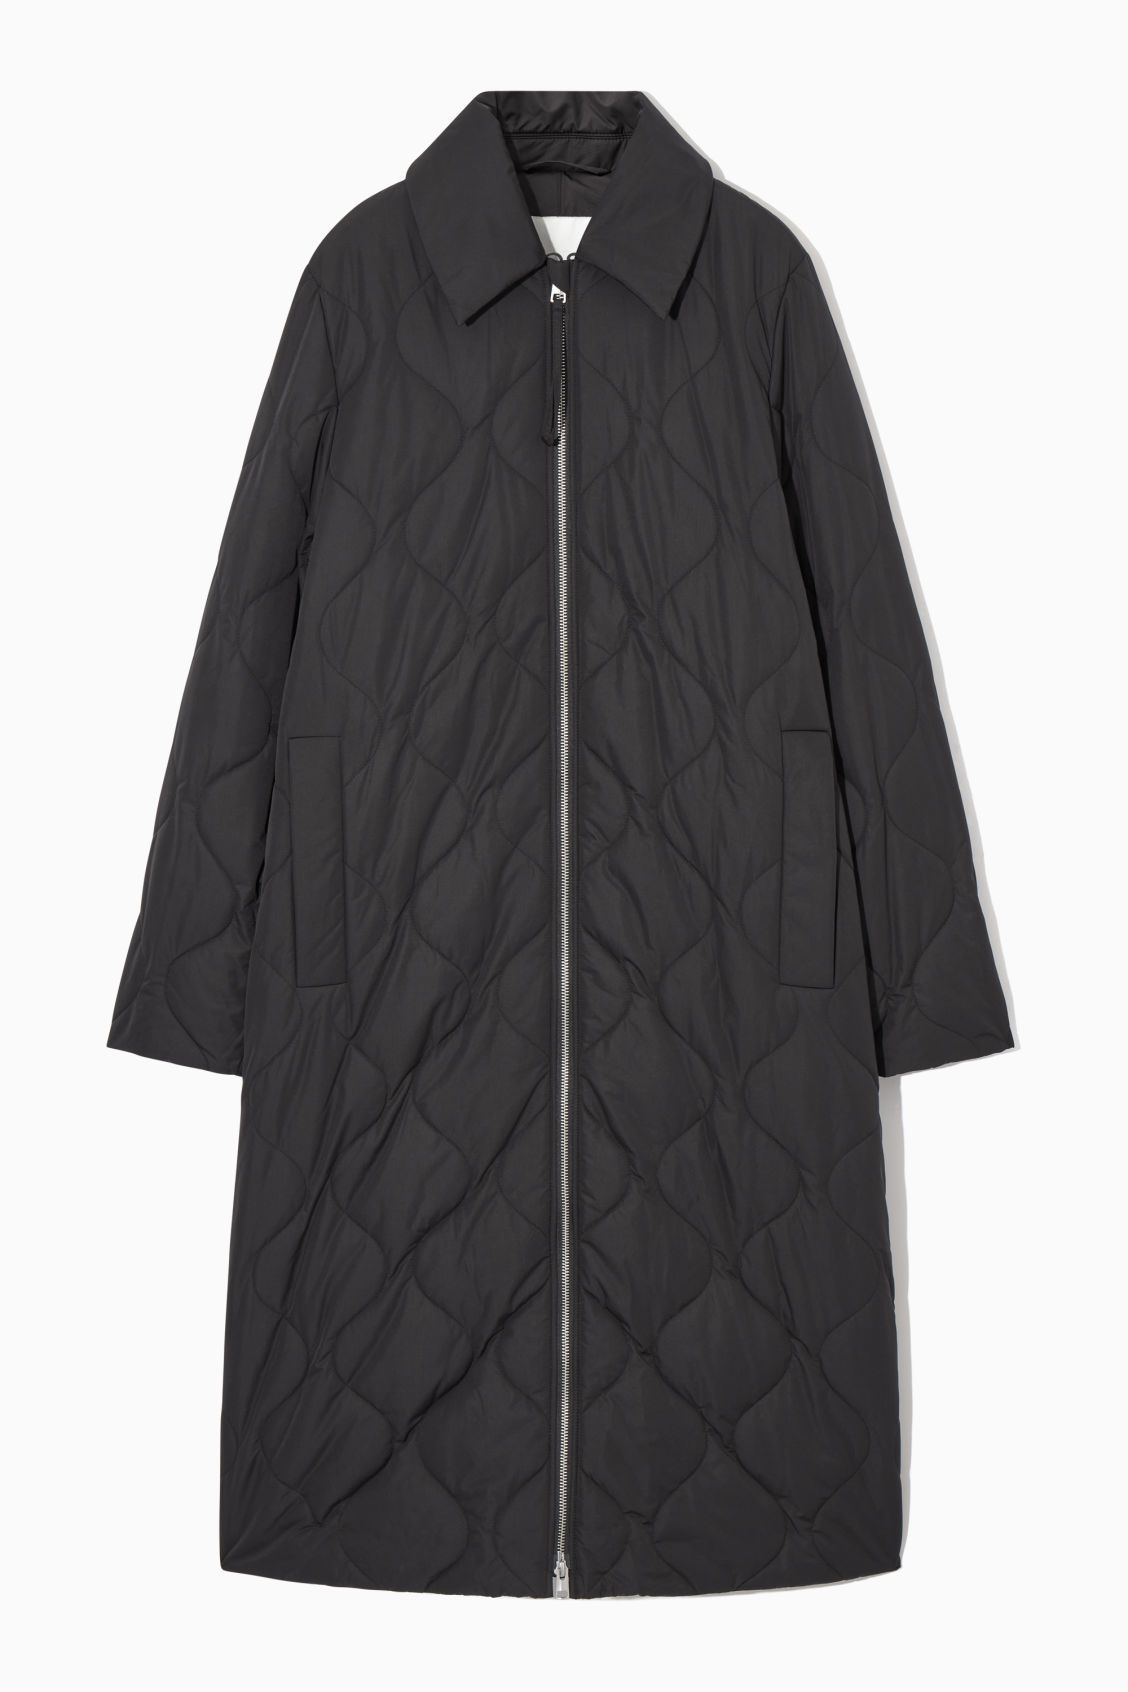 OVERSIZED QUILTED COAT - BLACK - COS | COS UK